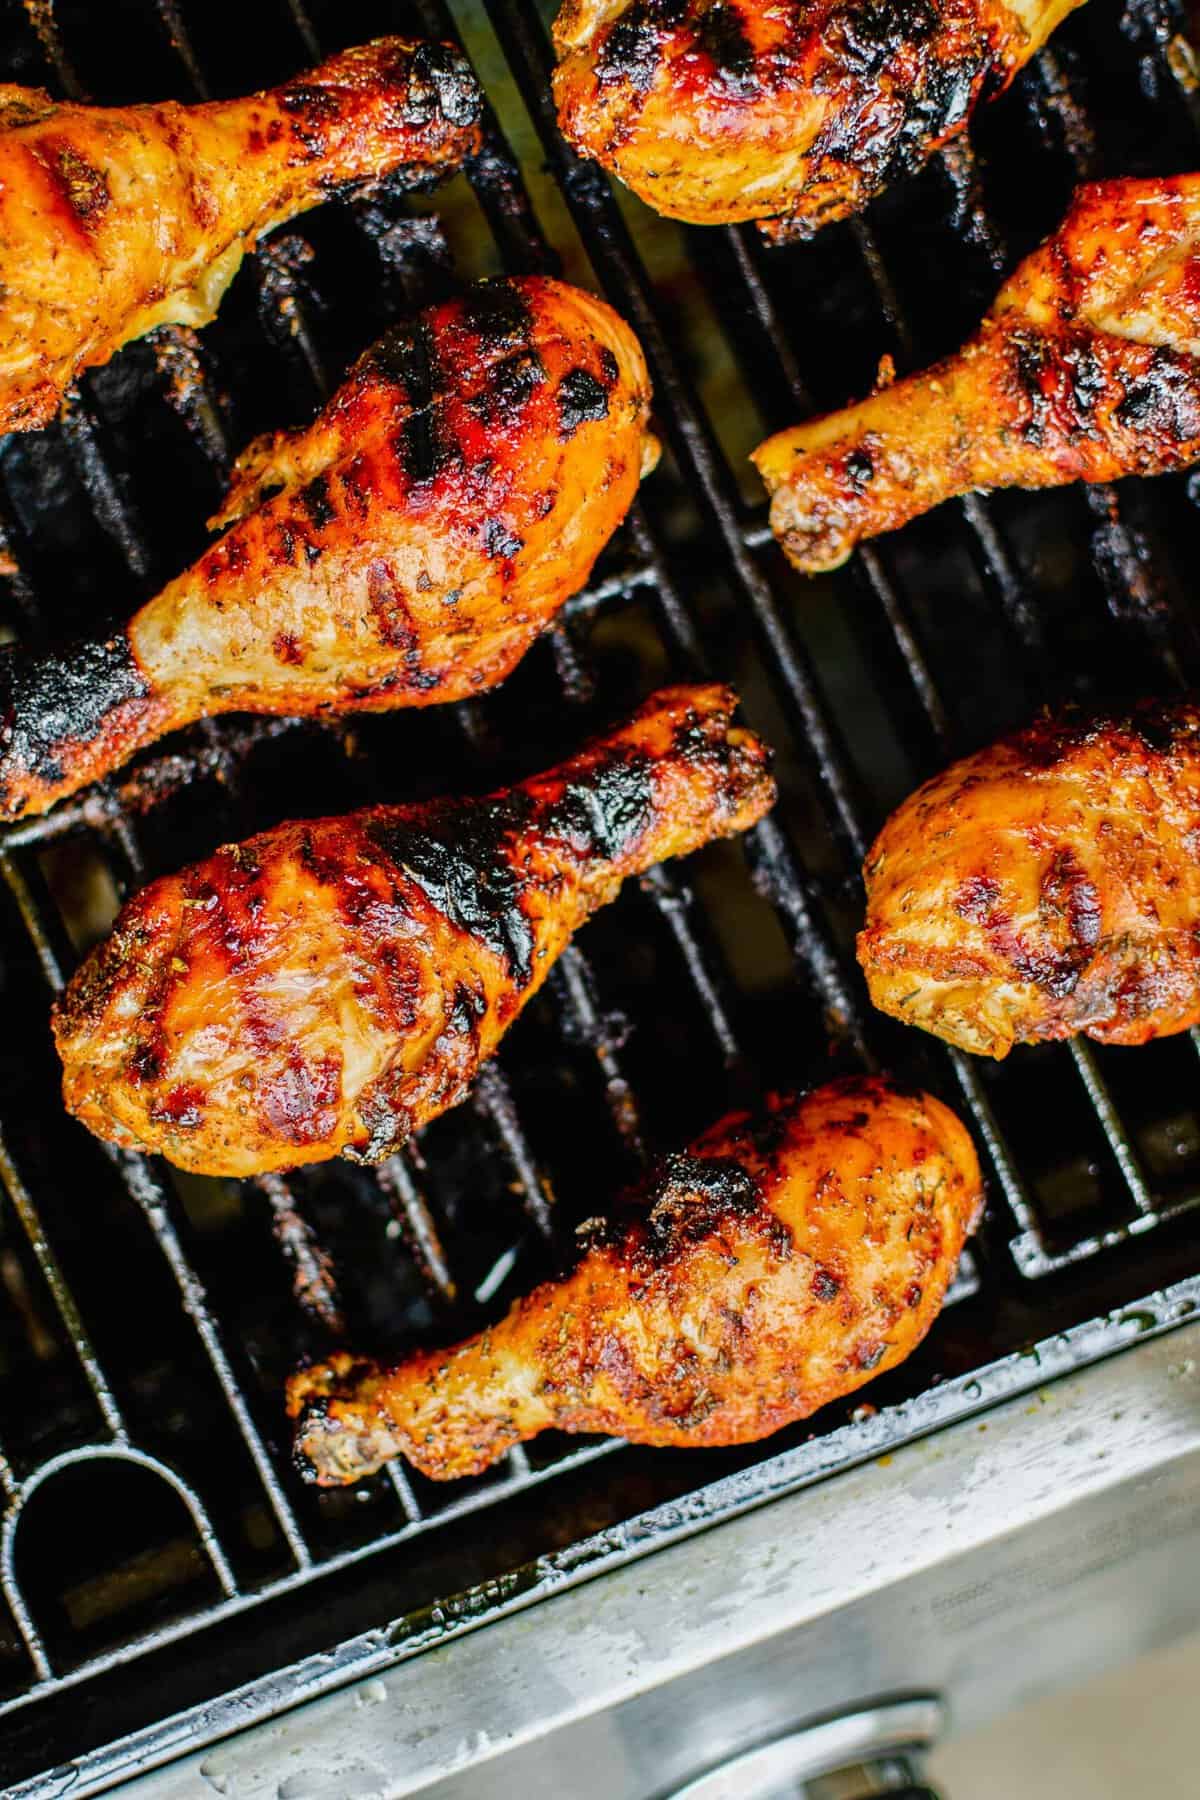 Chicken legs are cooked on a black grill. 